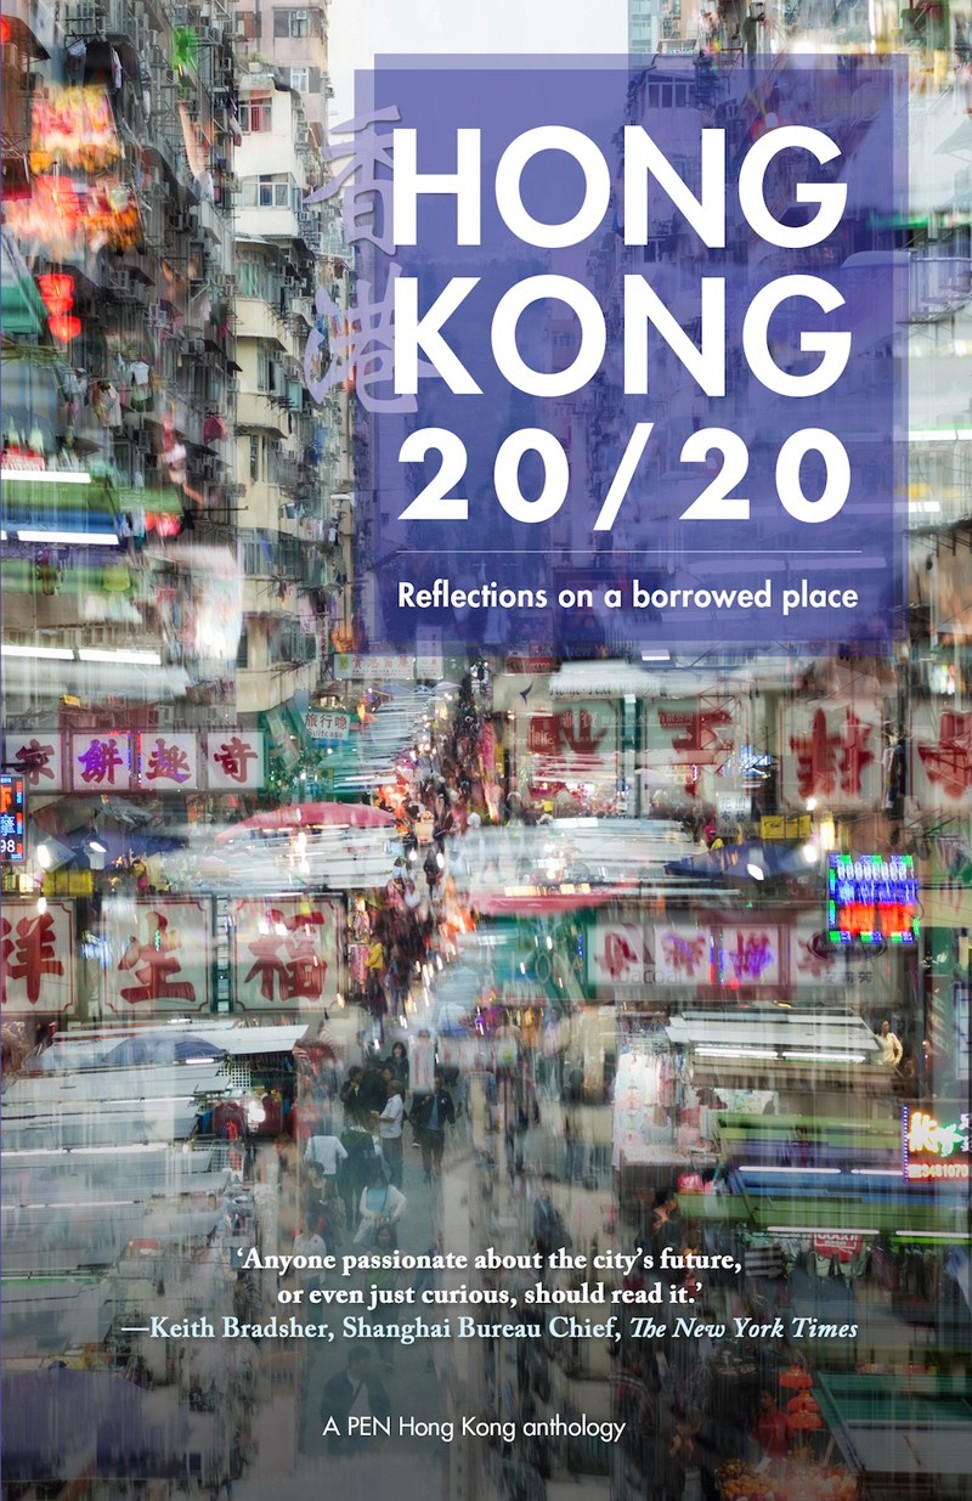 Hong Kong 20/20 includes 47 works.